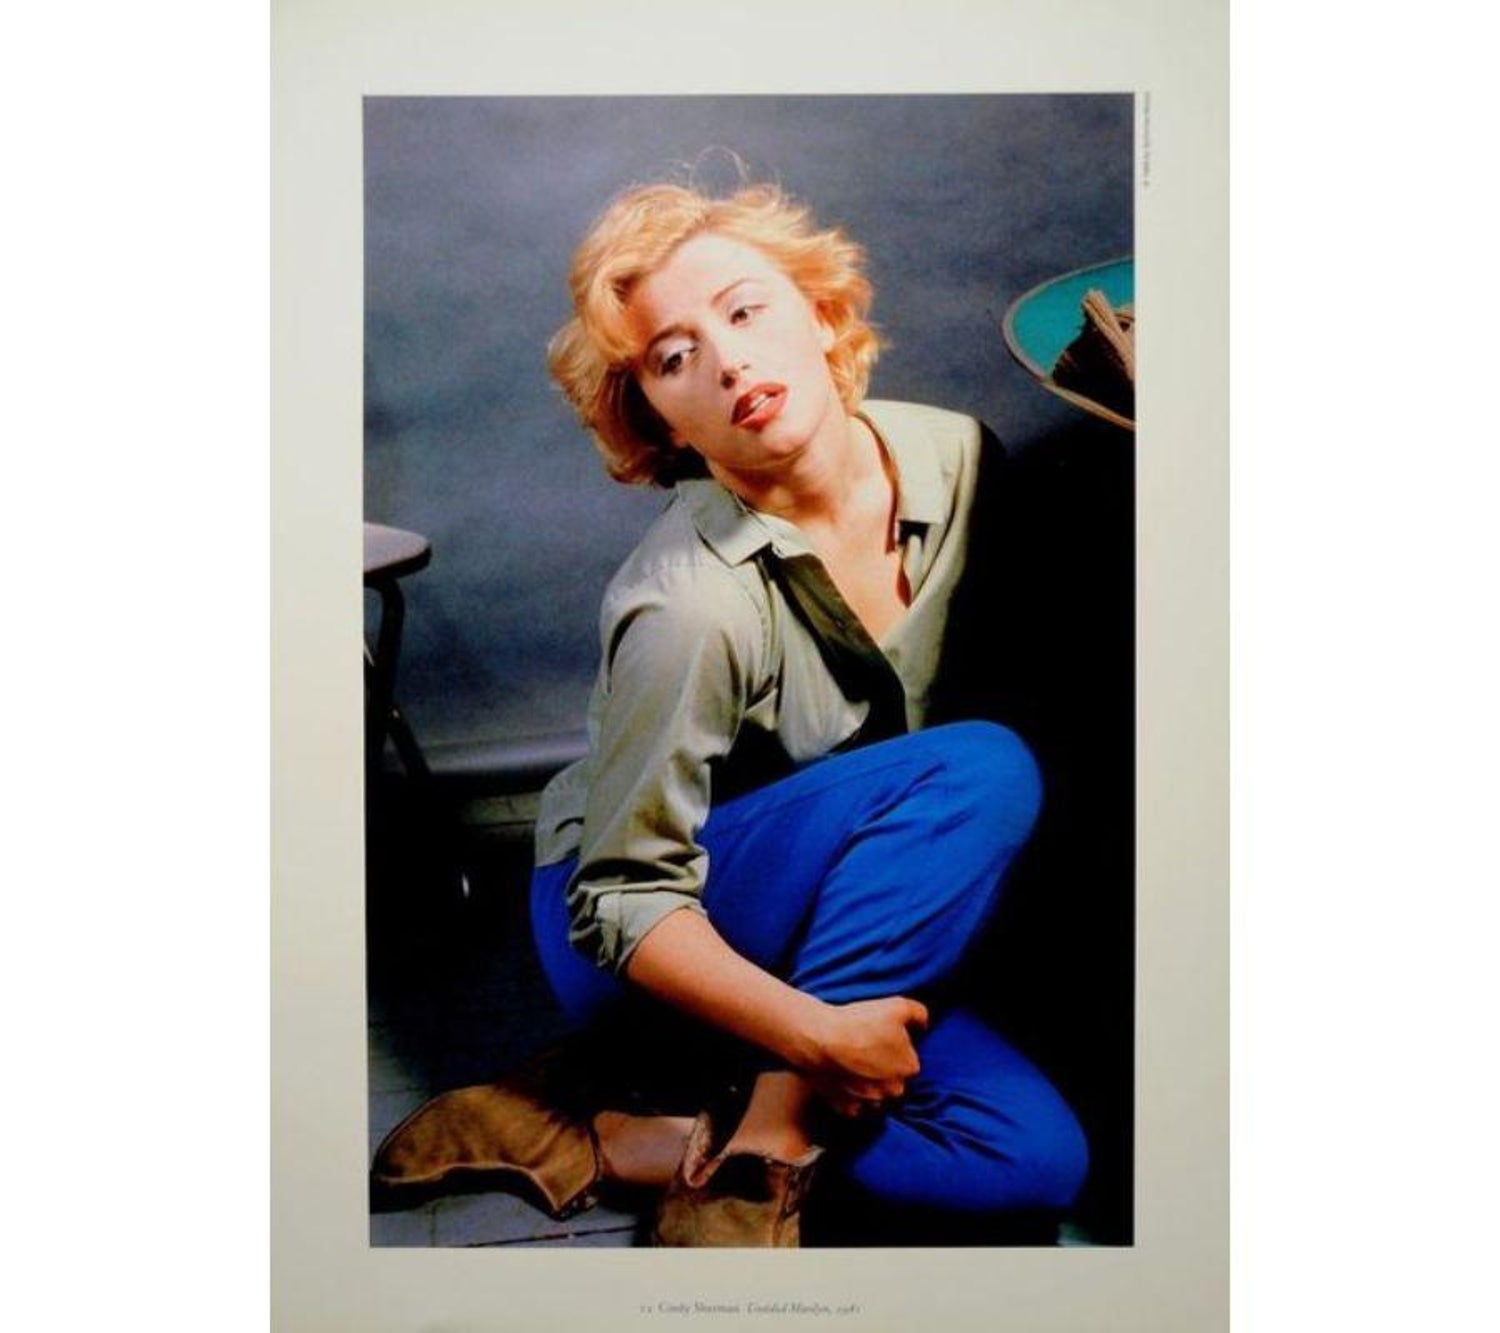 Cindy Sherman: Appropriation and the Archive